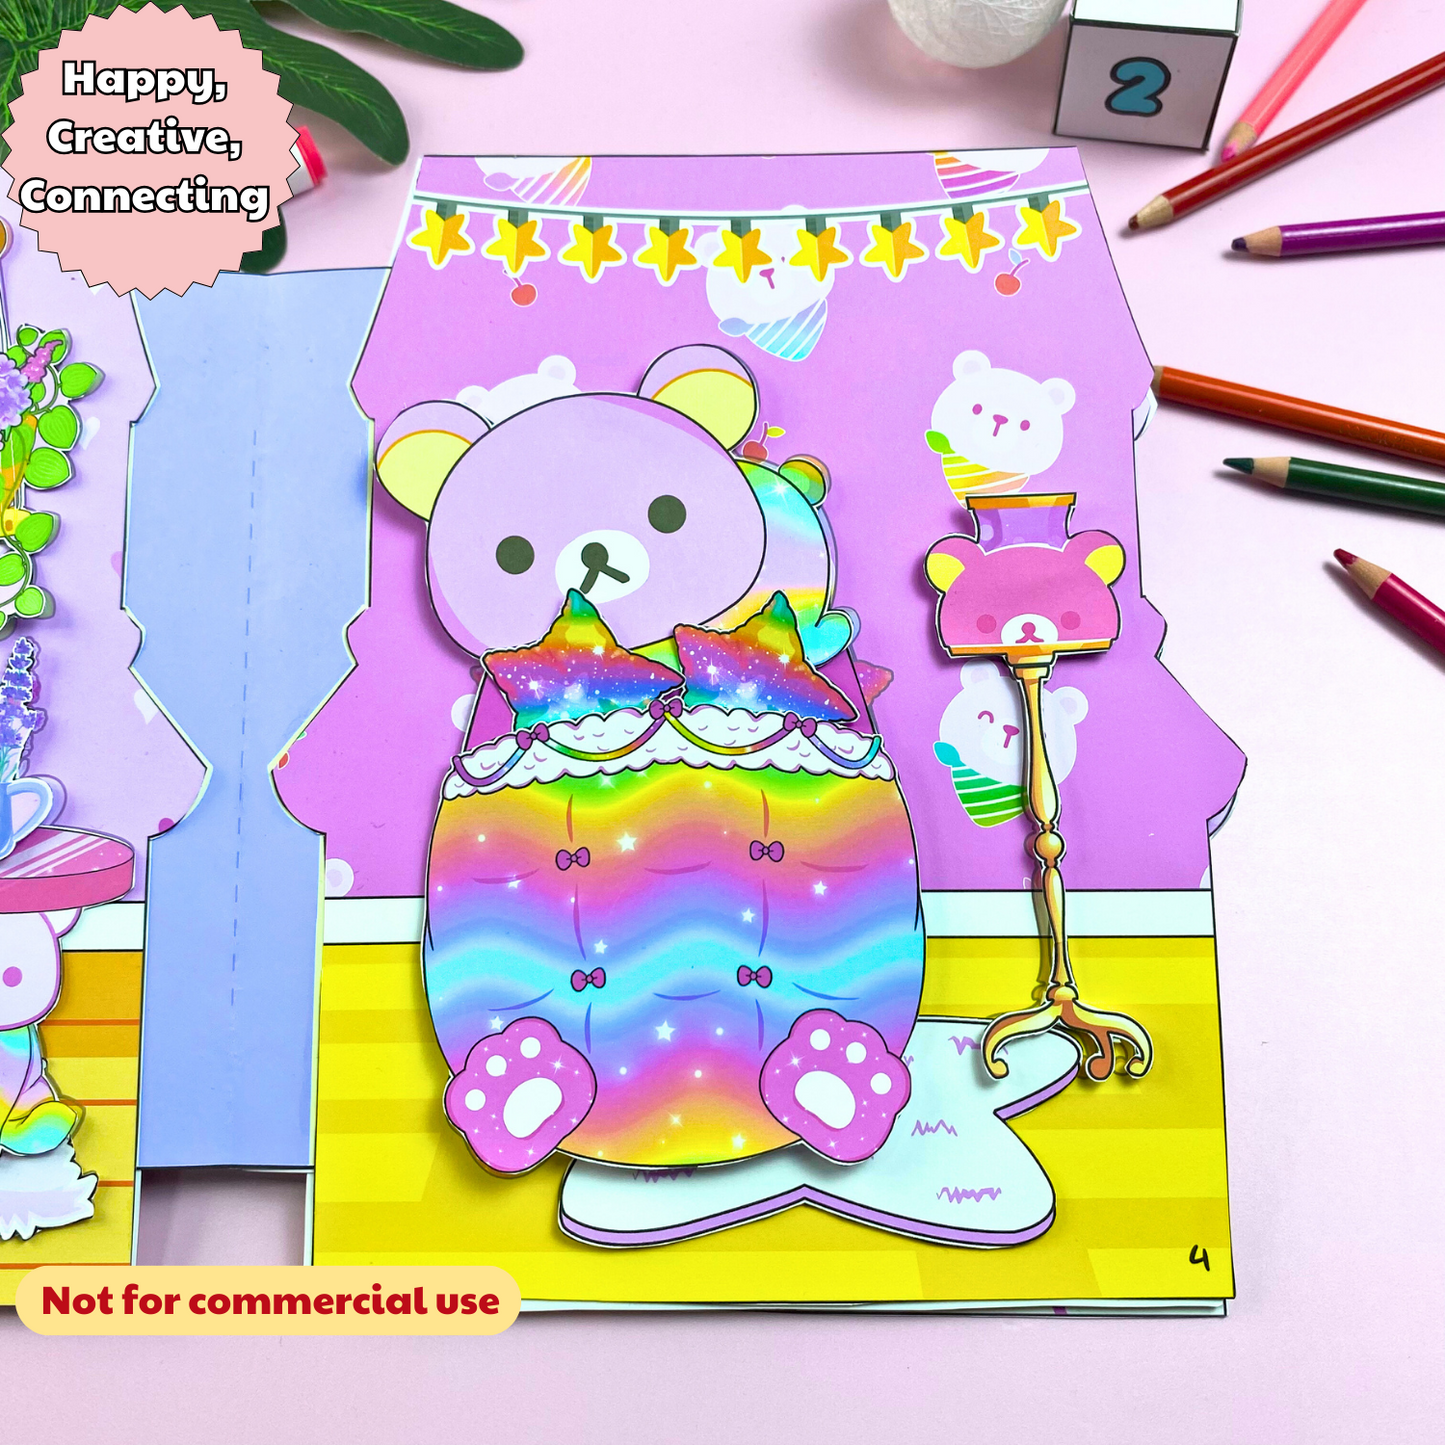 Education Activity Book | Pink Bear House Paper Dolls Activities & Busy Book for Kids | Paper Doll House | Montessori Toys, Gifts for Girls, DIY crafts